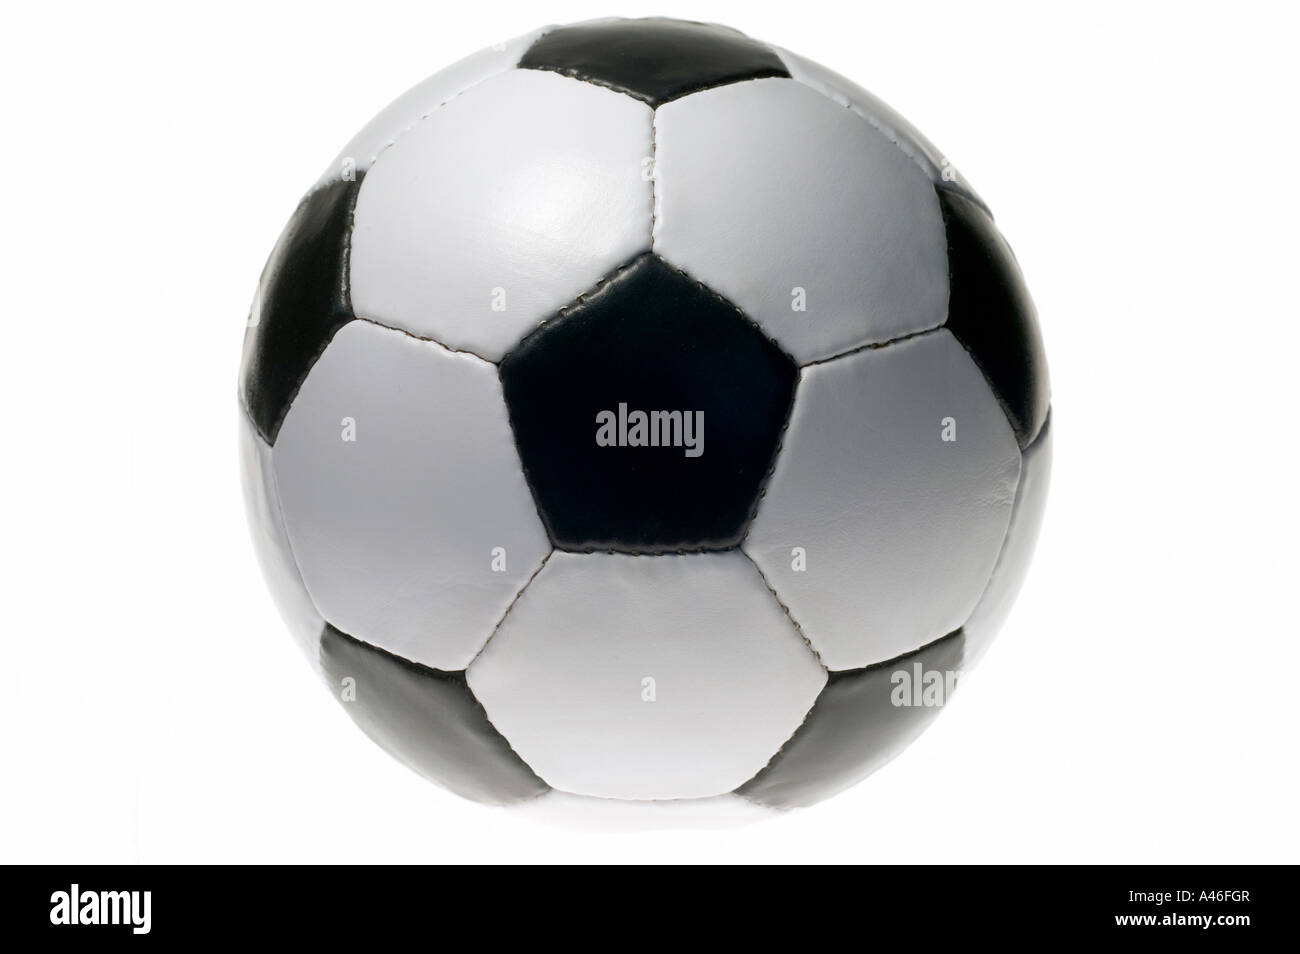 A soccer ball on white background Stock Photo